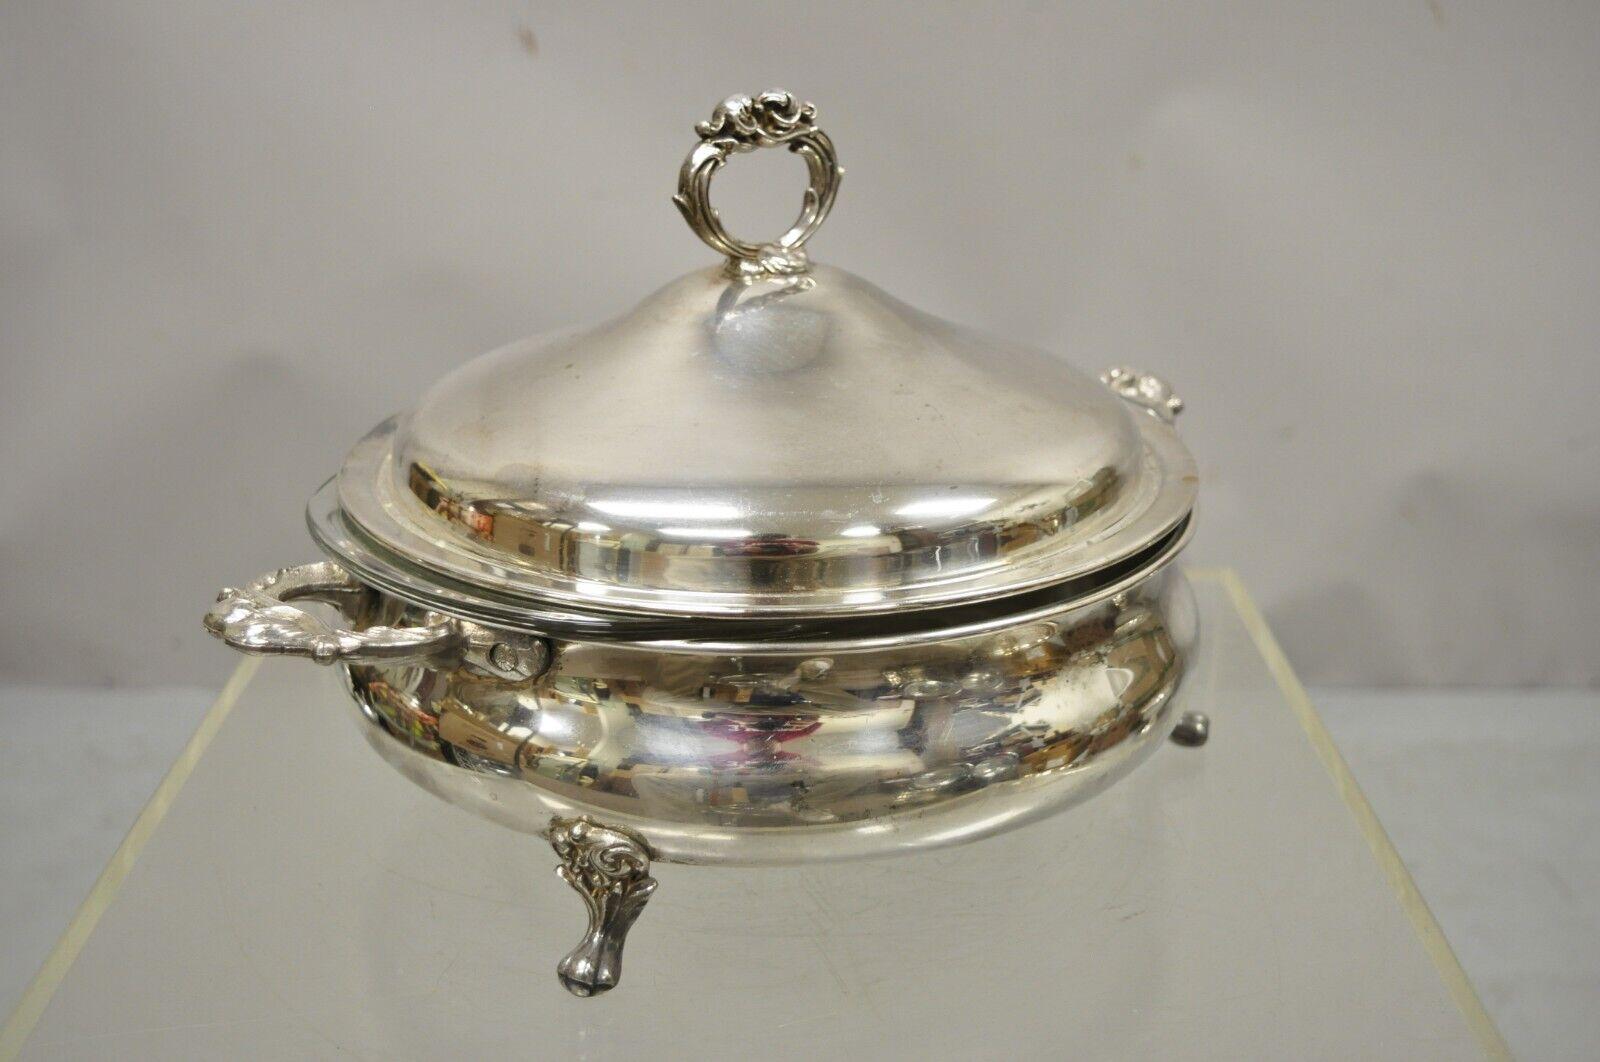 English Silver Mfg Corp silver plate covered platter serving tray dish bowl on feet. Item features pyrex glass liner, ornate domed lid, twin handles, raised on feet. Circa mid 20th century. Measurements: 9